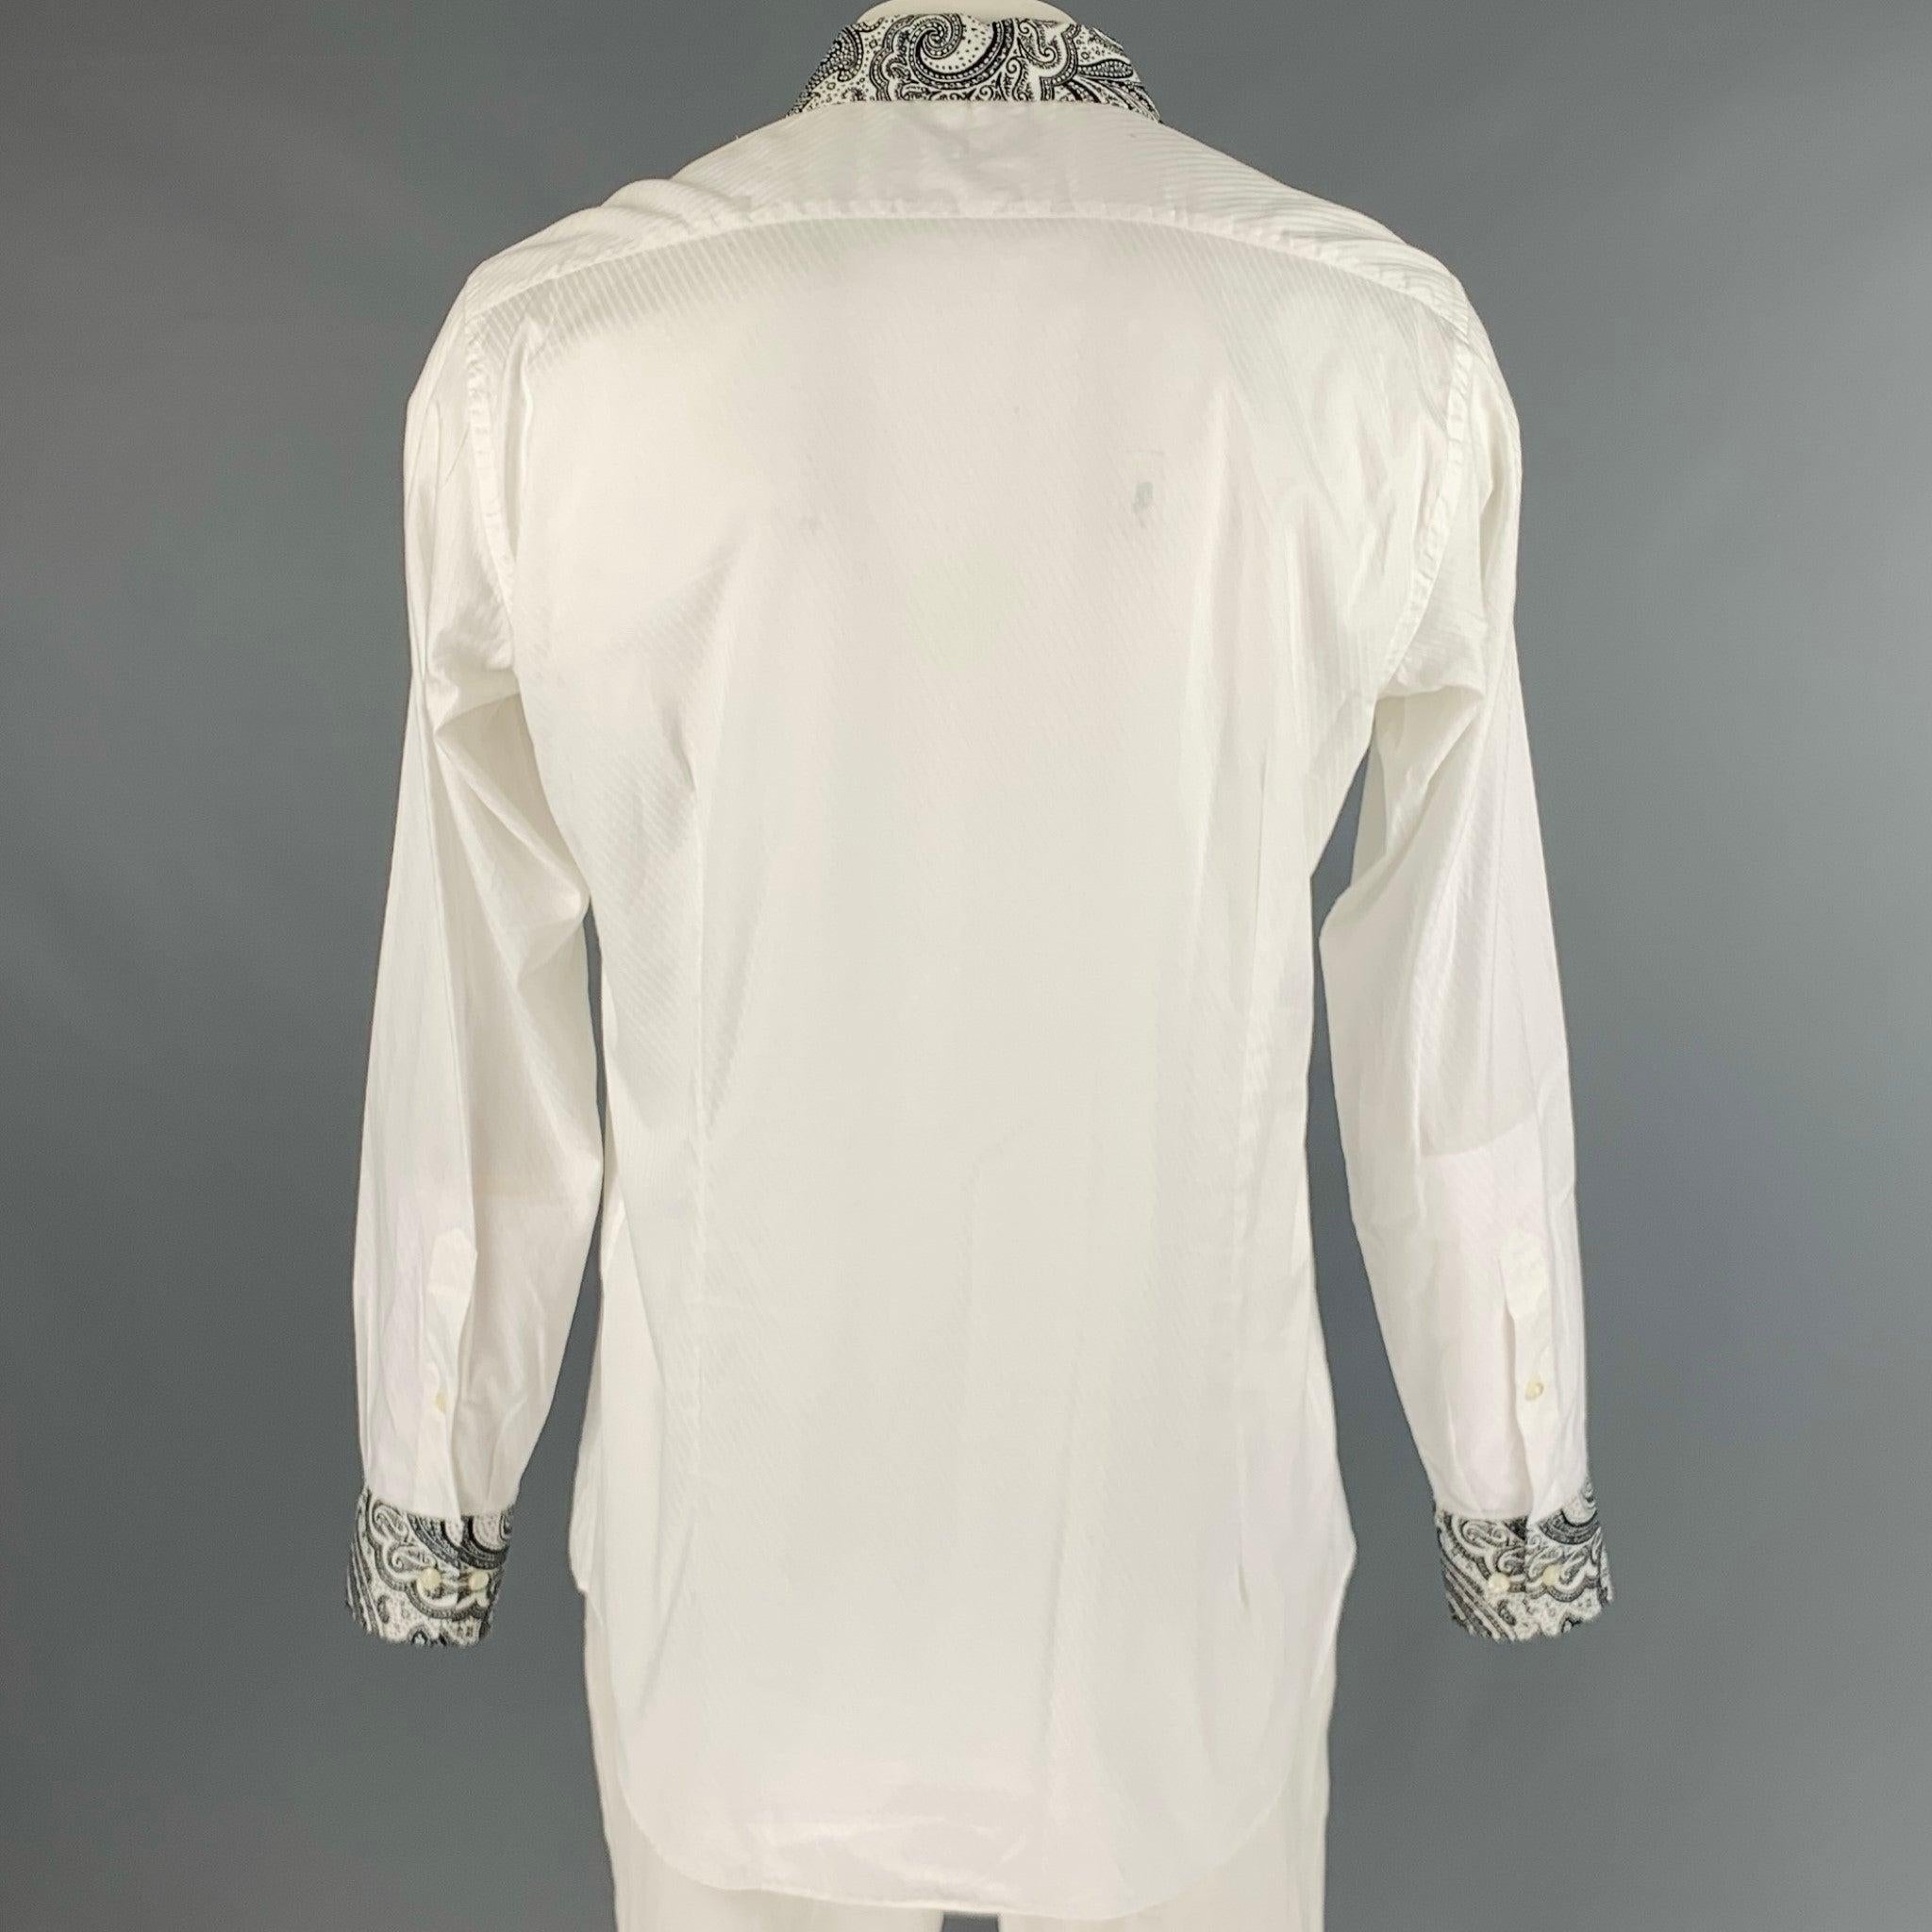 ETRO long sleeve shirt
in a
white cotton fabric featuring diagonal stripe pattern, contrast collar and cuffs with black paisley print, and a button closure. Made in Italy.Very Good Pre-Owned Condition. Marks inside of collar, and minor mark on